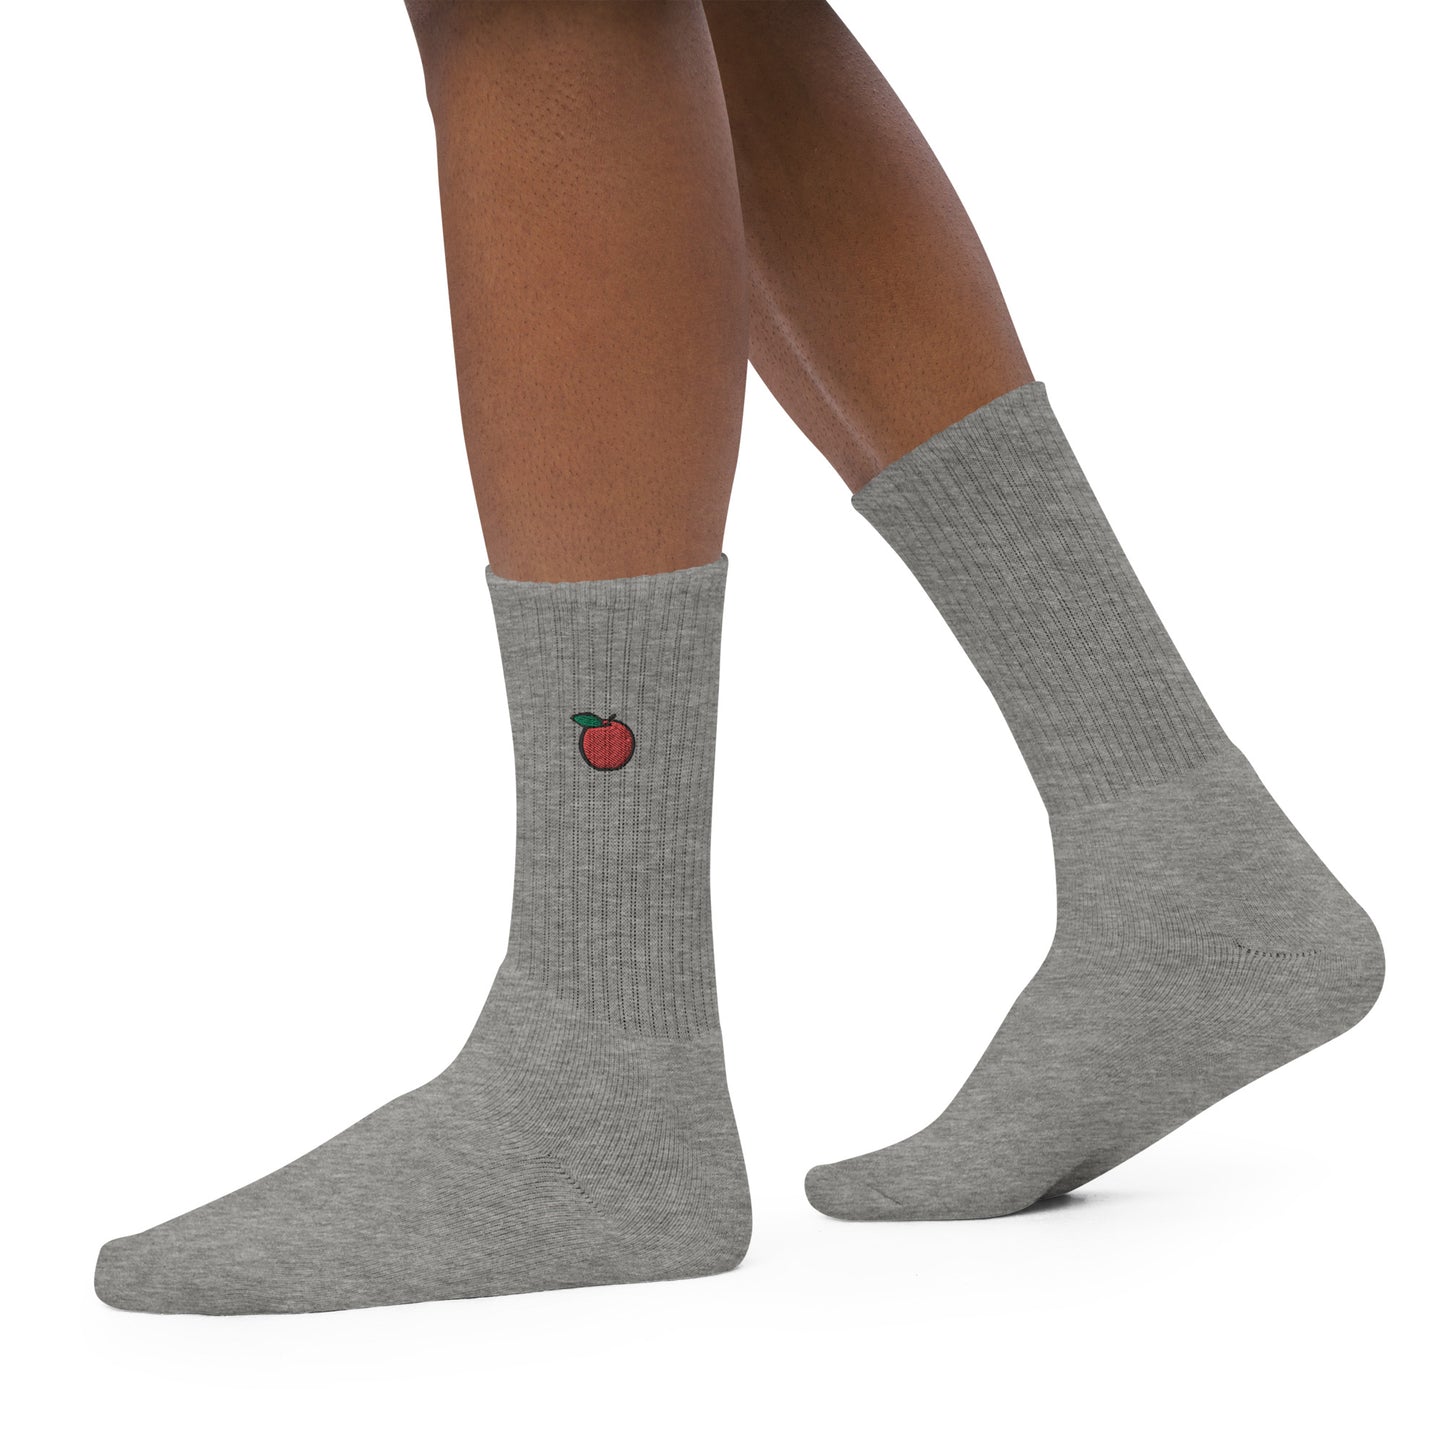 socks-from-the-side-with-apple-fruit-symbol